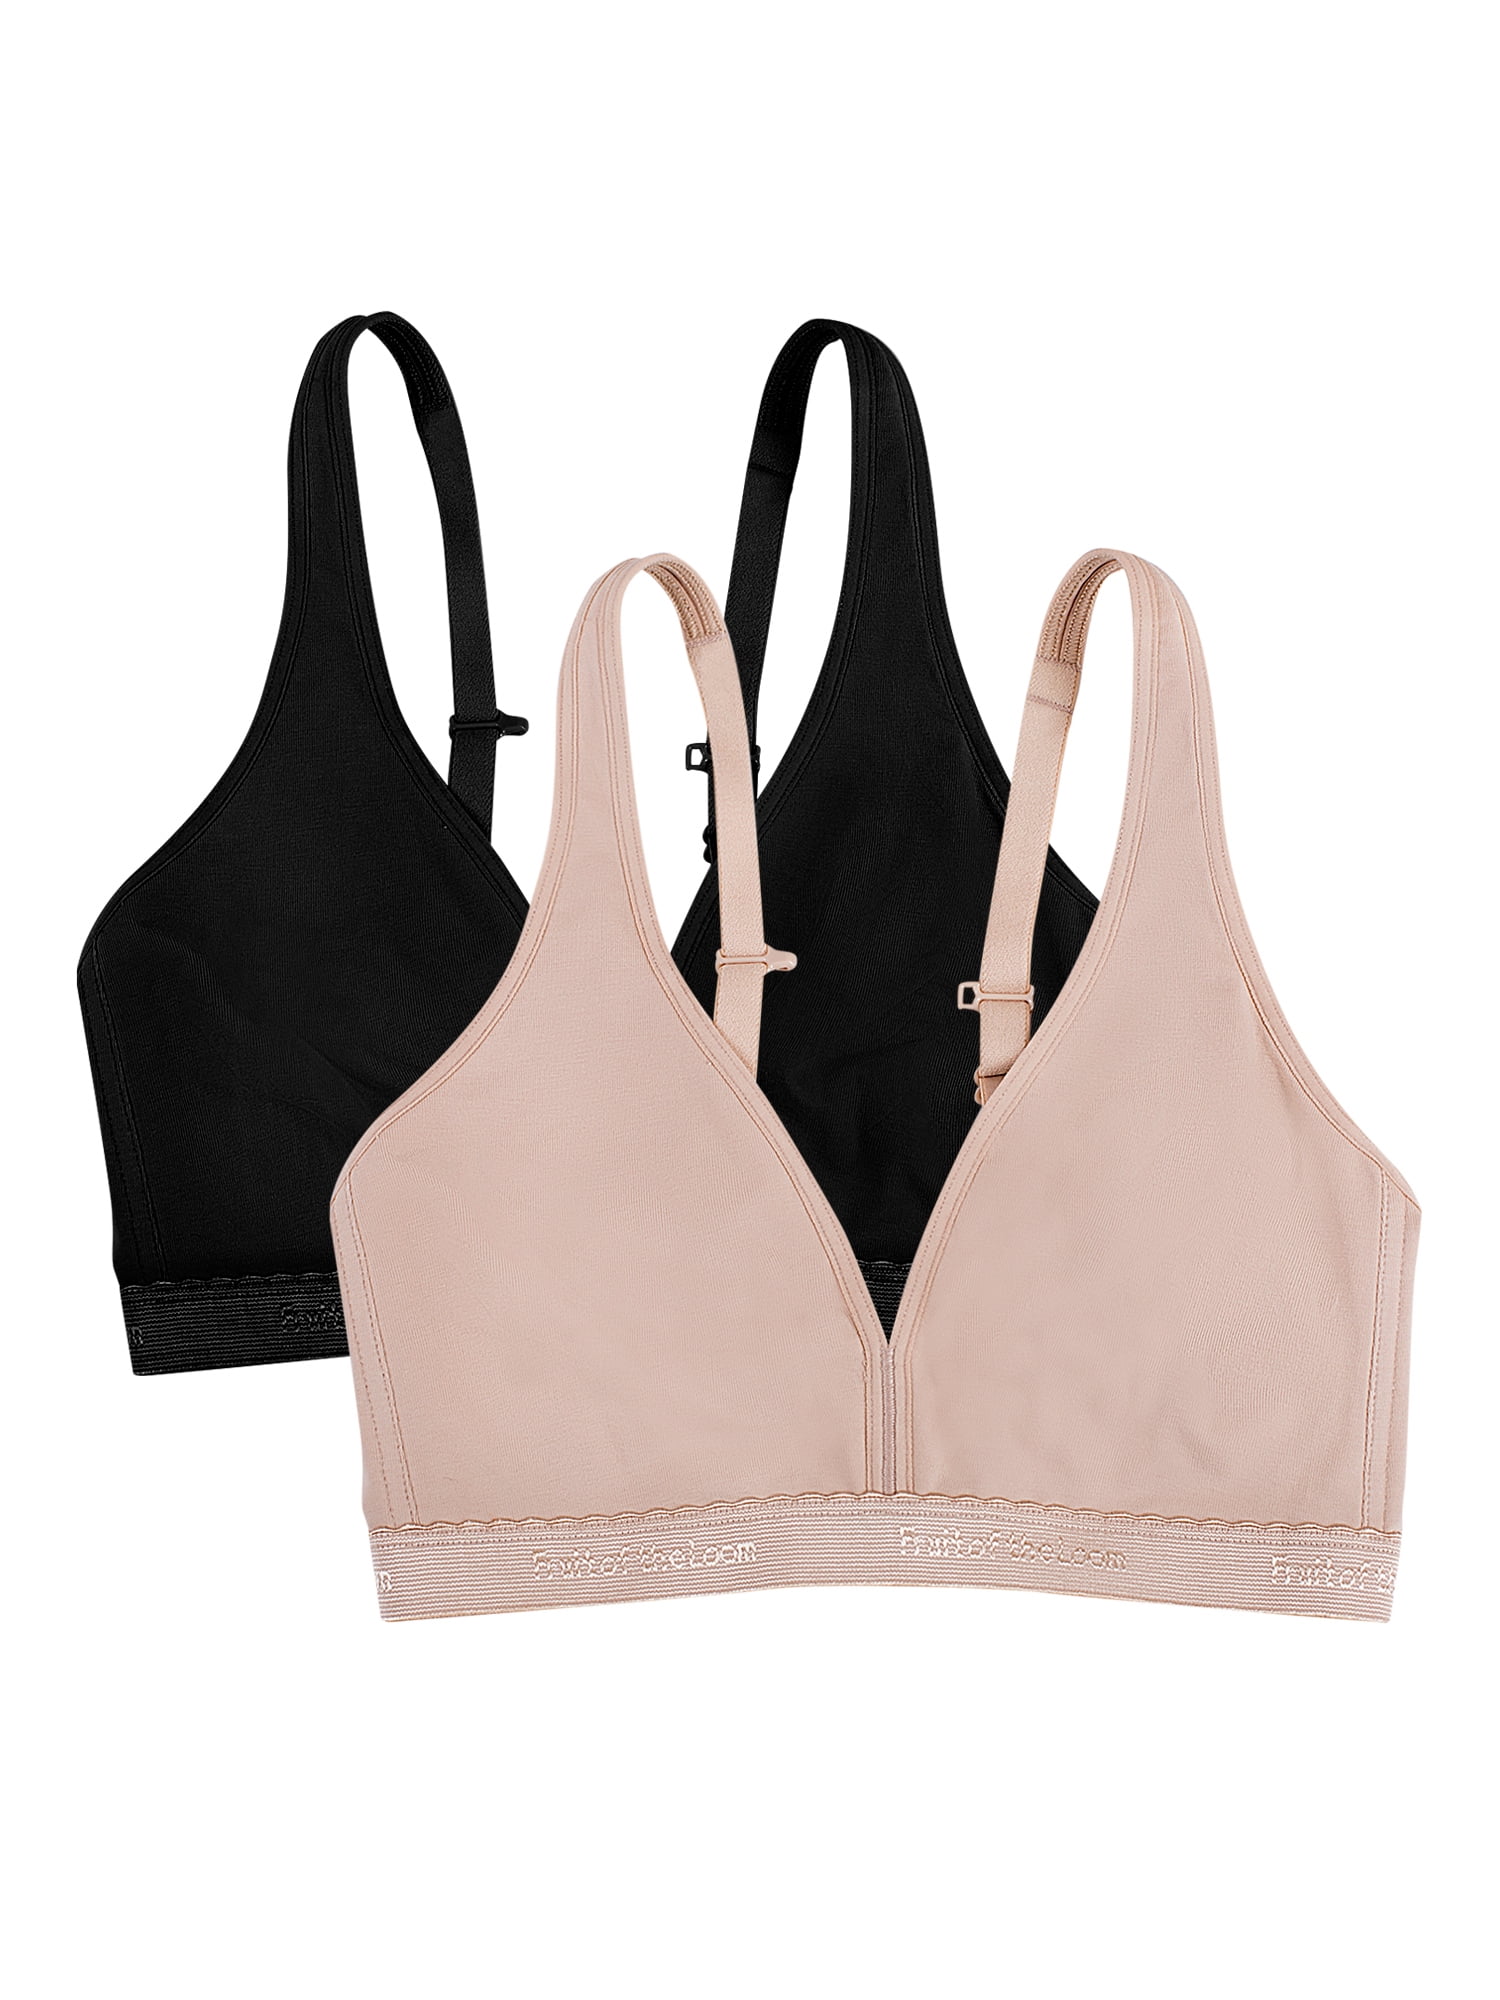 Fruit of the Loom Women's Wirefree Cotton Bralette, 2-pack, Style ...